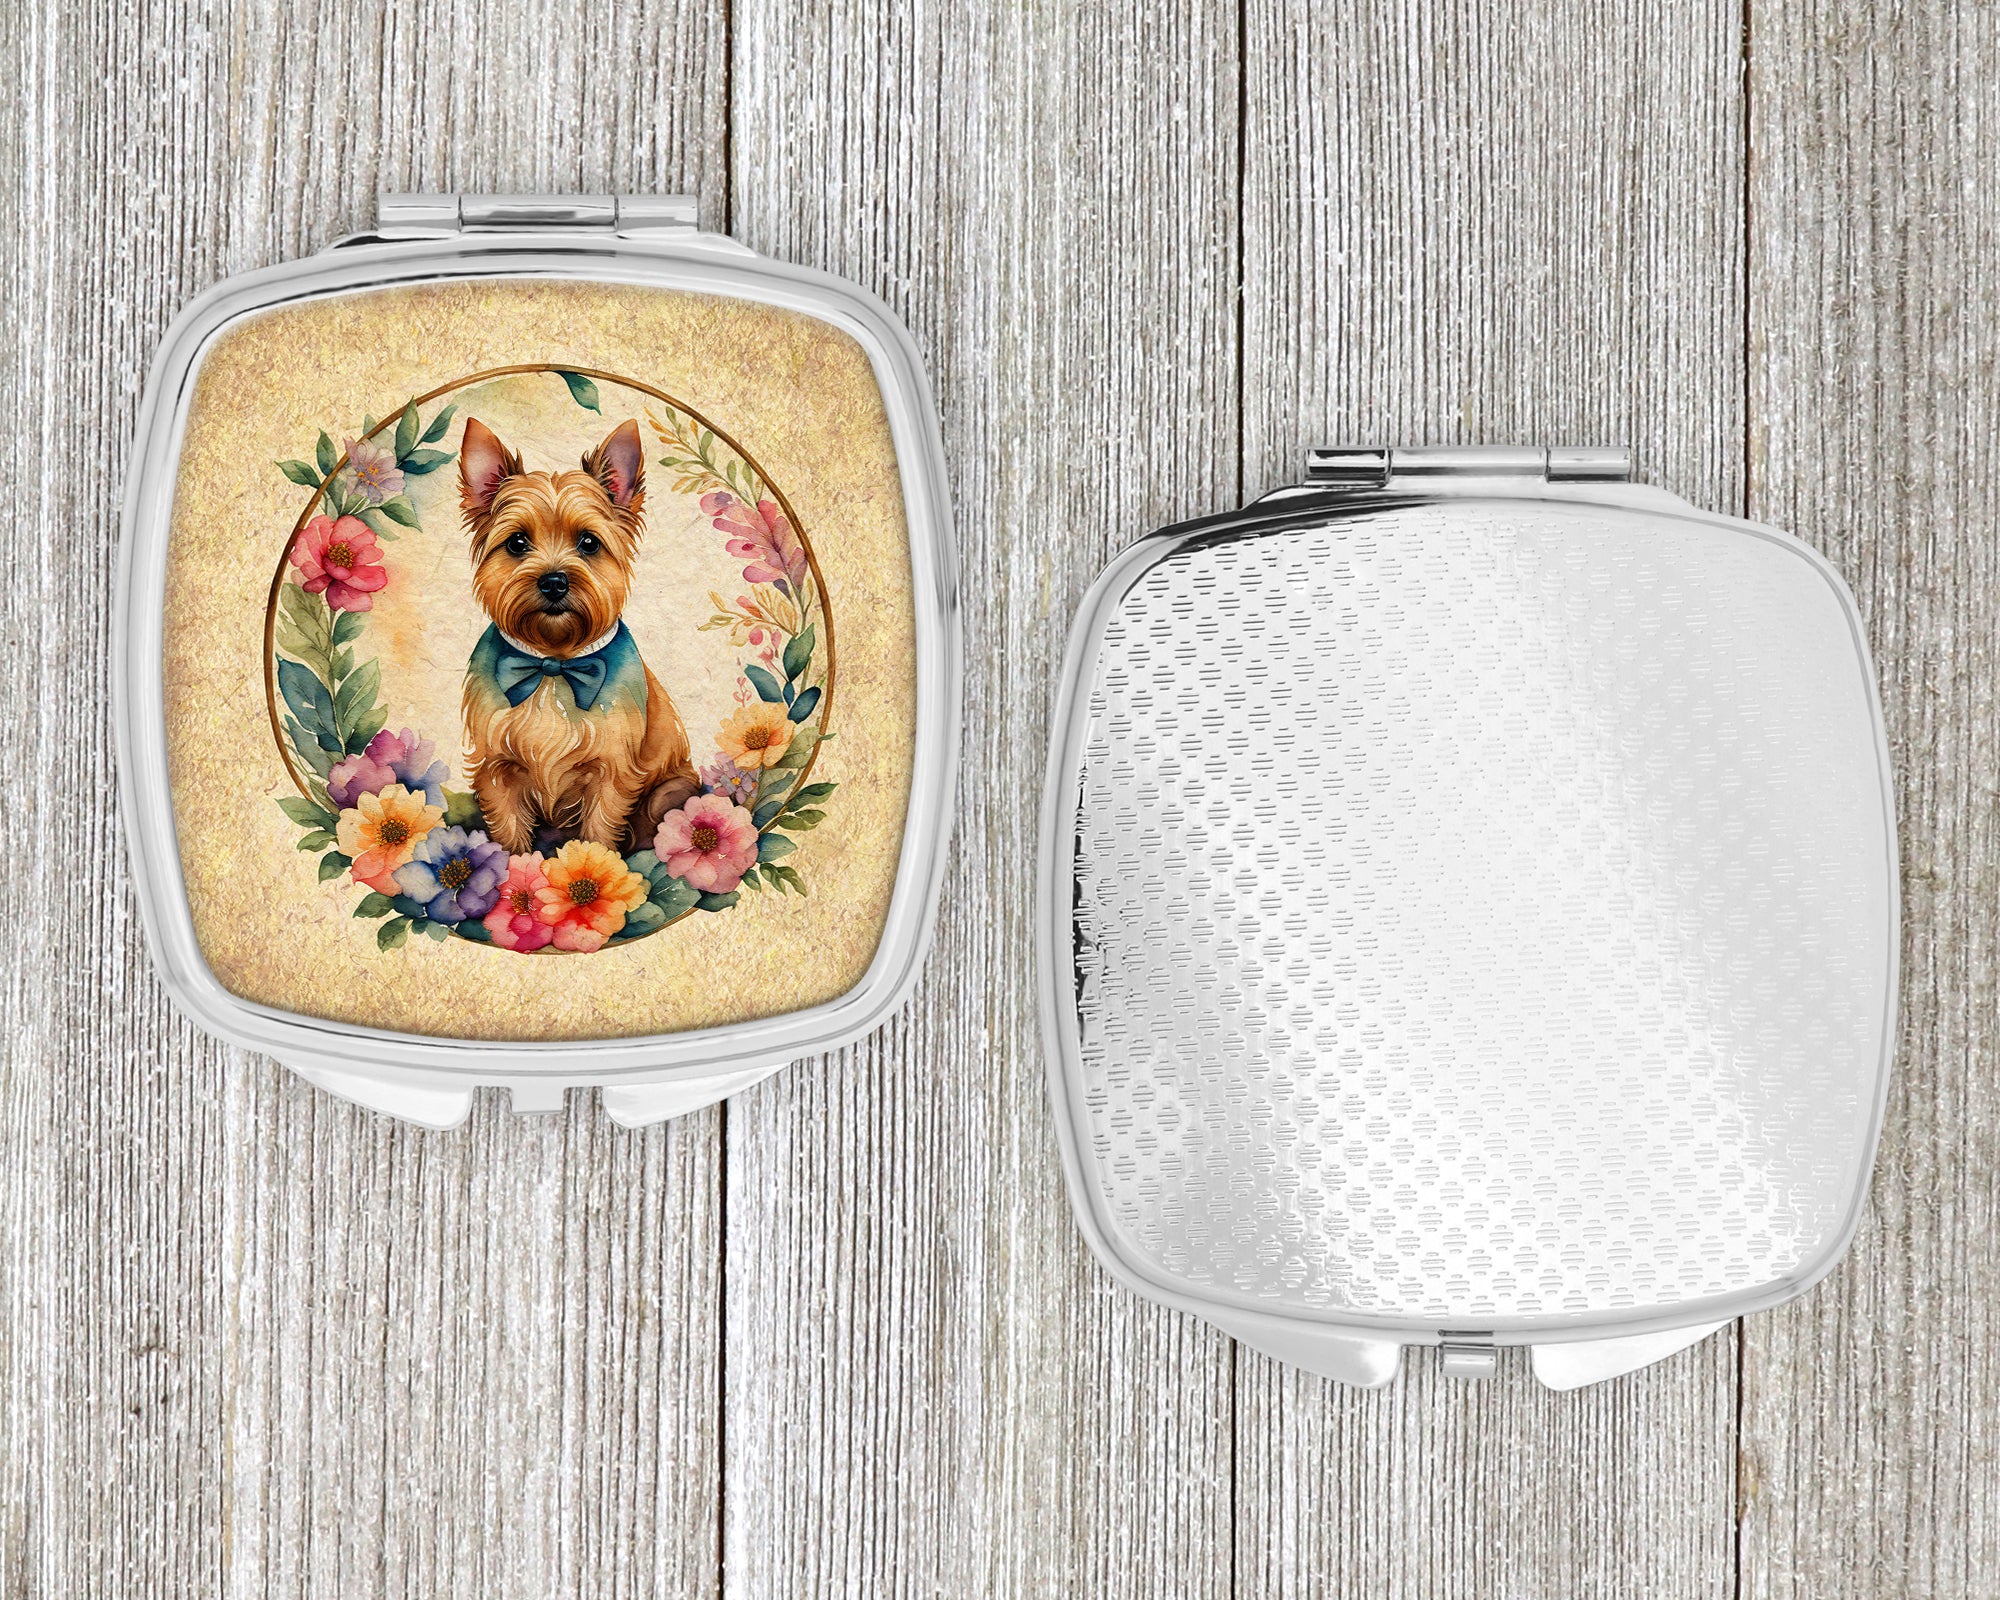 Norwich Terrier and Flowers Compact Mirror